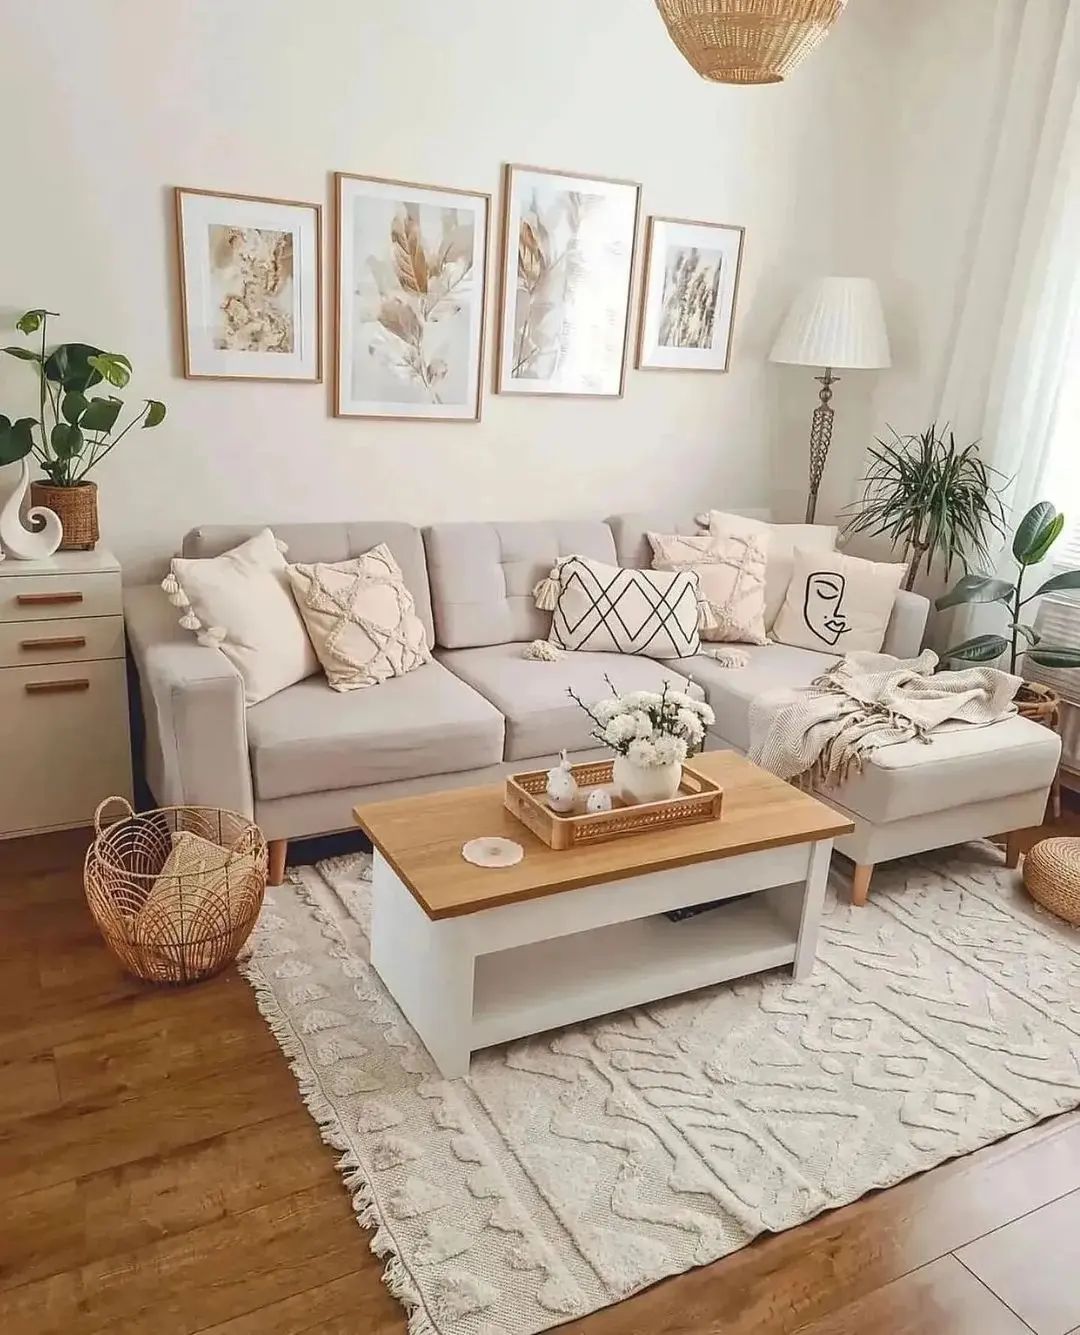 a textured floor rug can instantly elevate the decor of a living room like in this living room where a sectional and coffee table is anchored using the rug